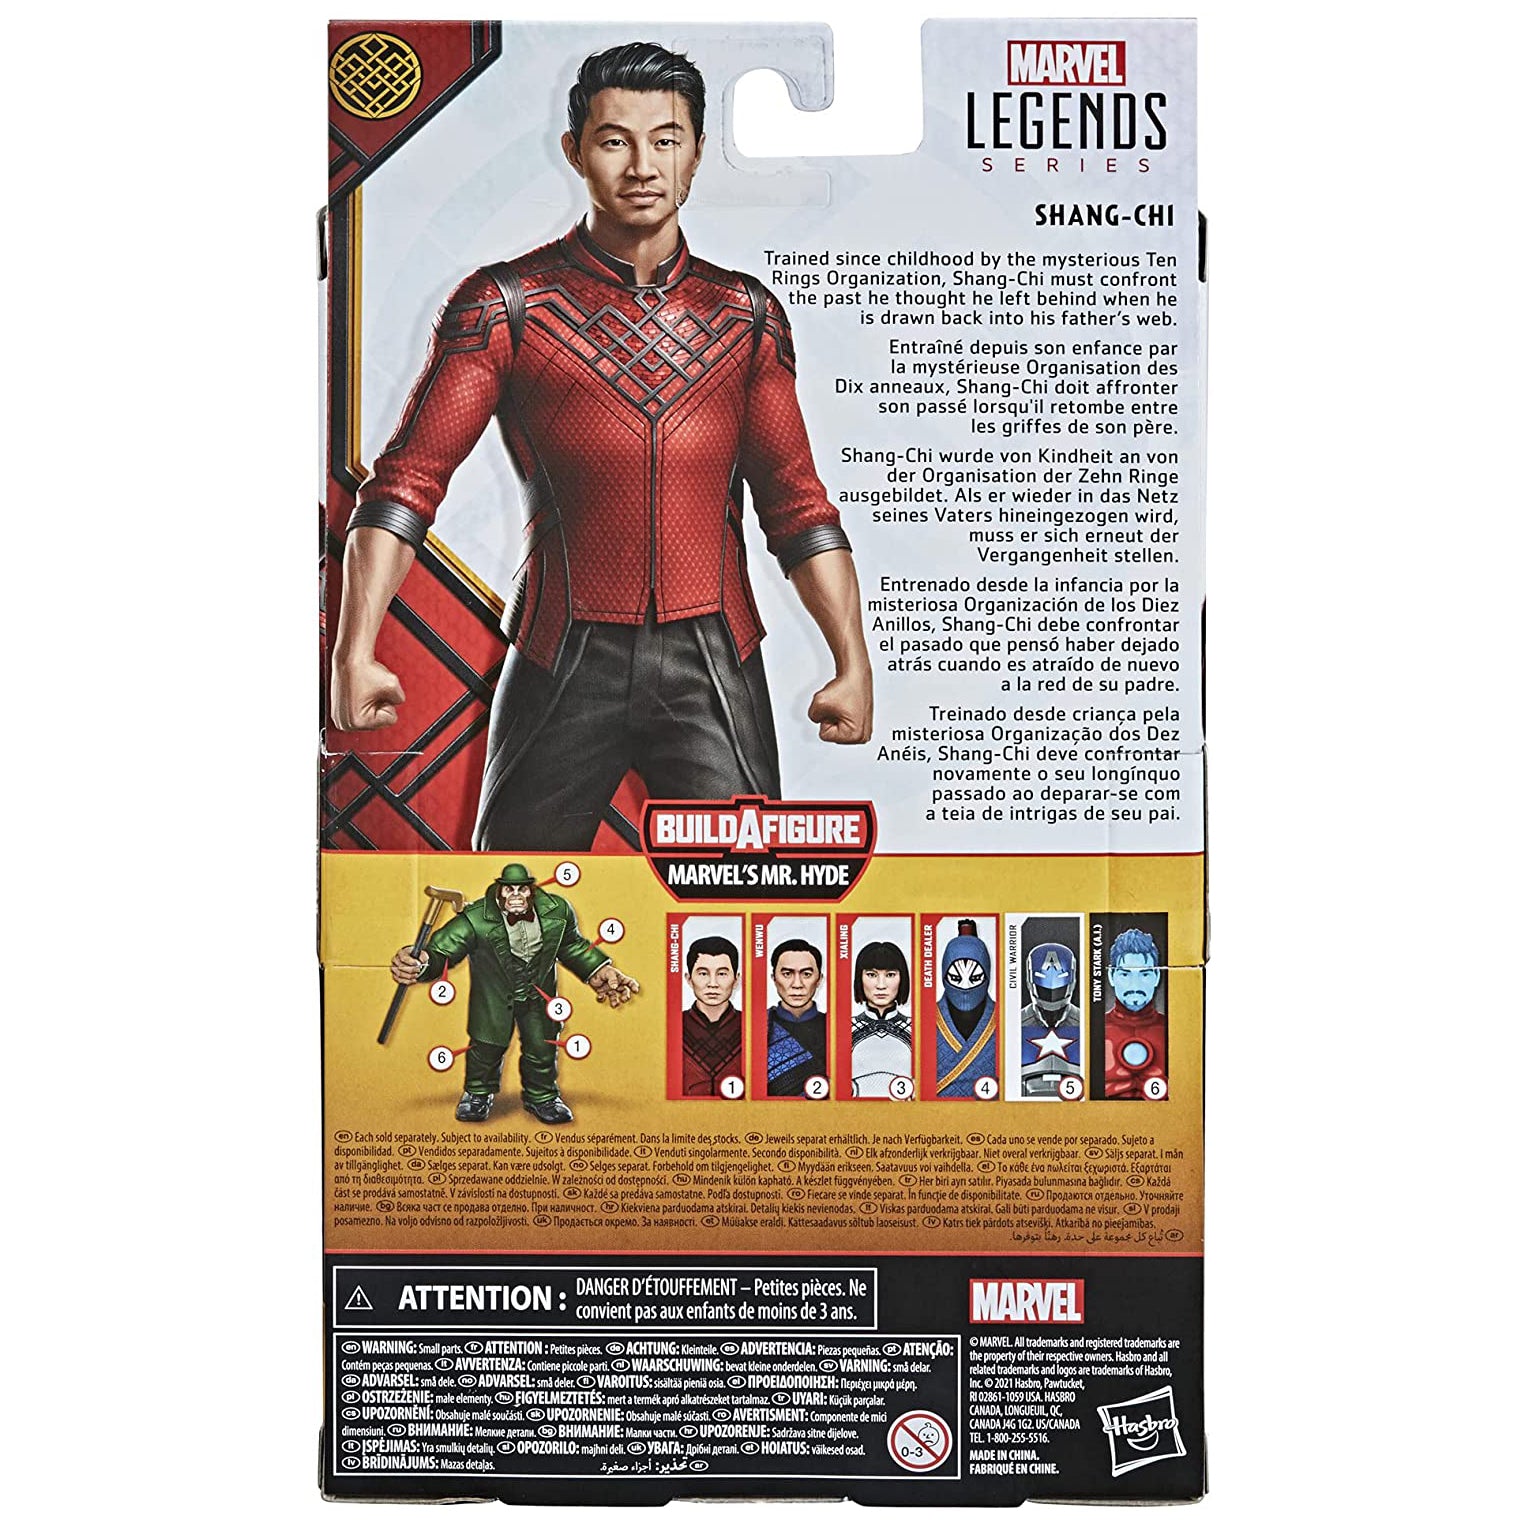 Marvel Legends Shang-Chi Legend of the Ten Rings Shang-Chi Figure